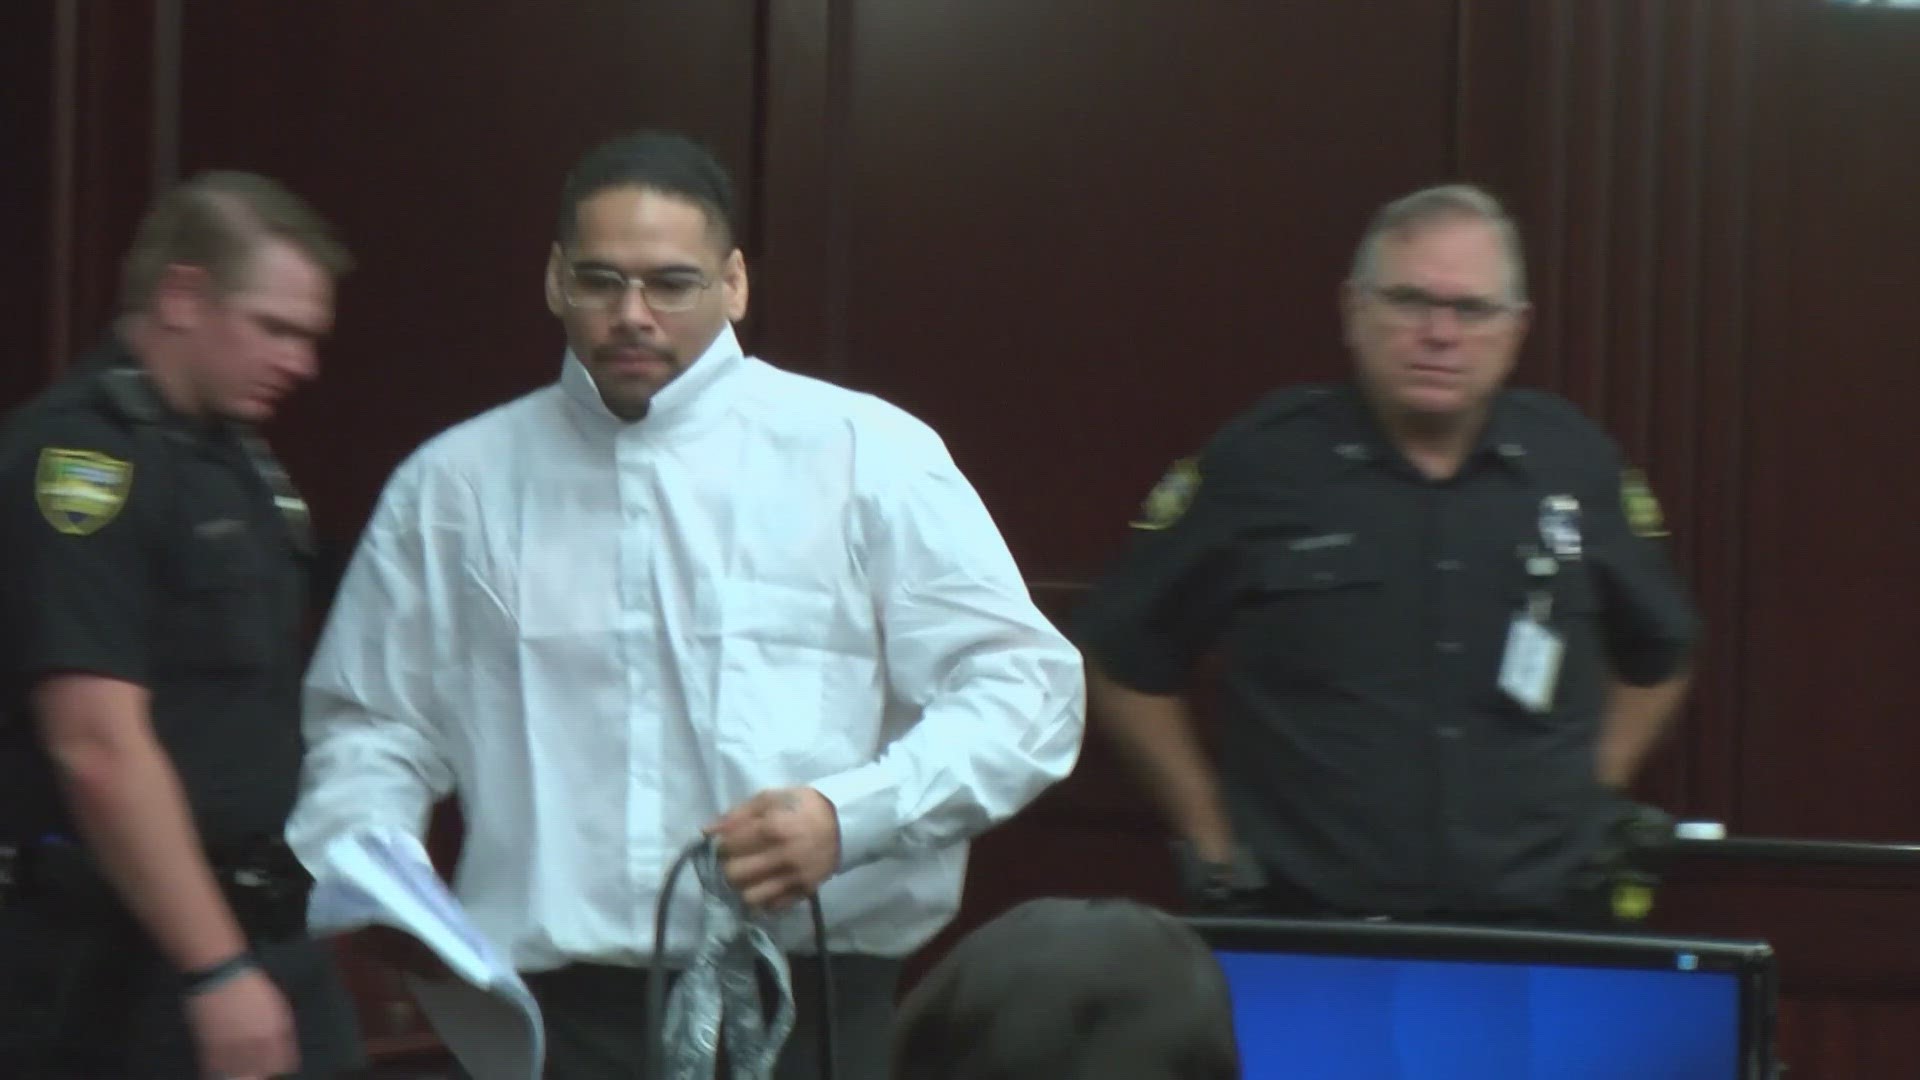 Quiles is accused of murdering his 16yo niece Iyana Sawyer in 2018 after getting her pregnant. Quiles pleaded not guilty to first-degree murder & sexual battery.